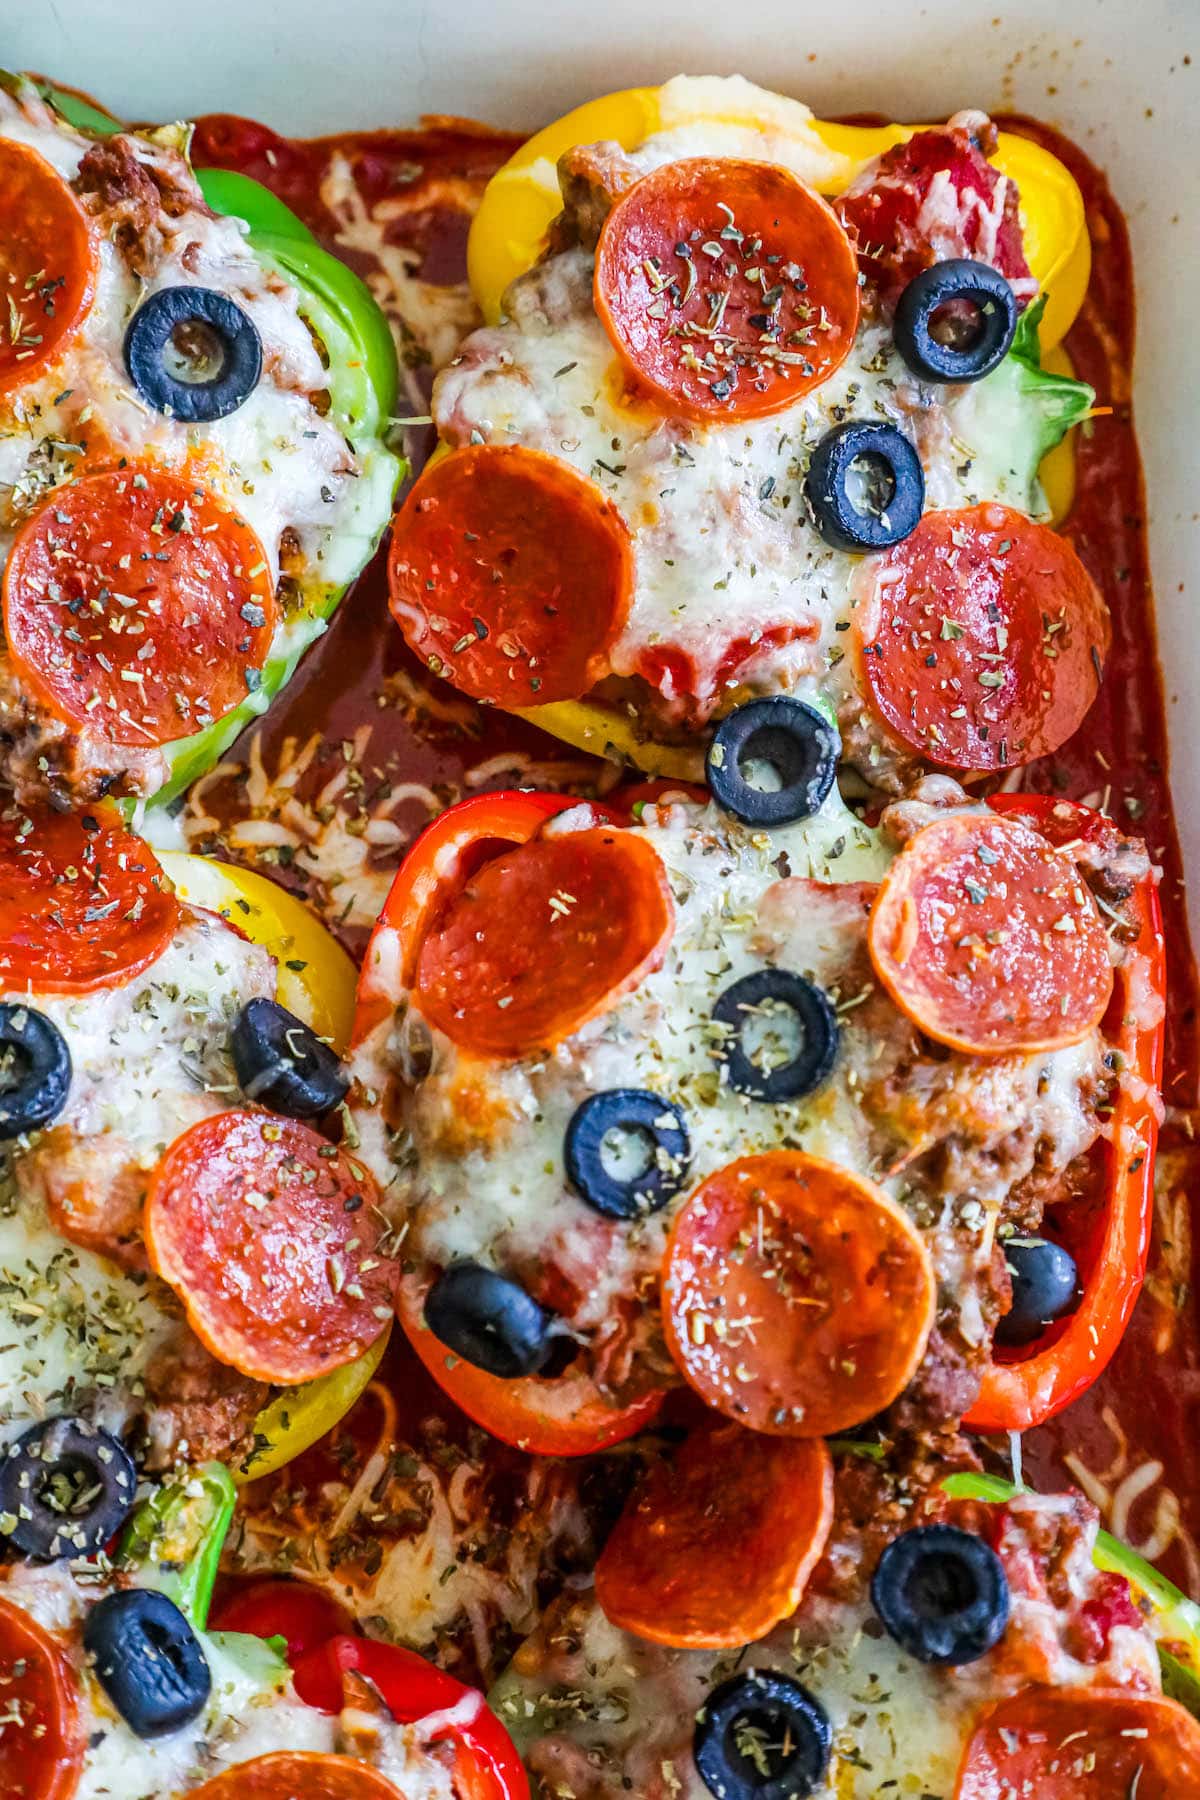 bell peppers filled with pizza toppings over marinara sauce in a white pan